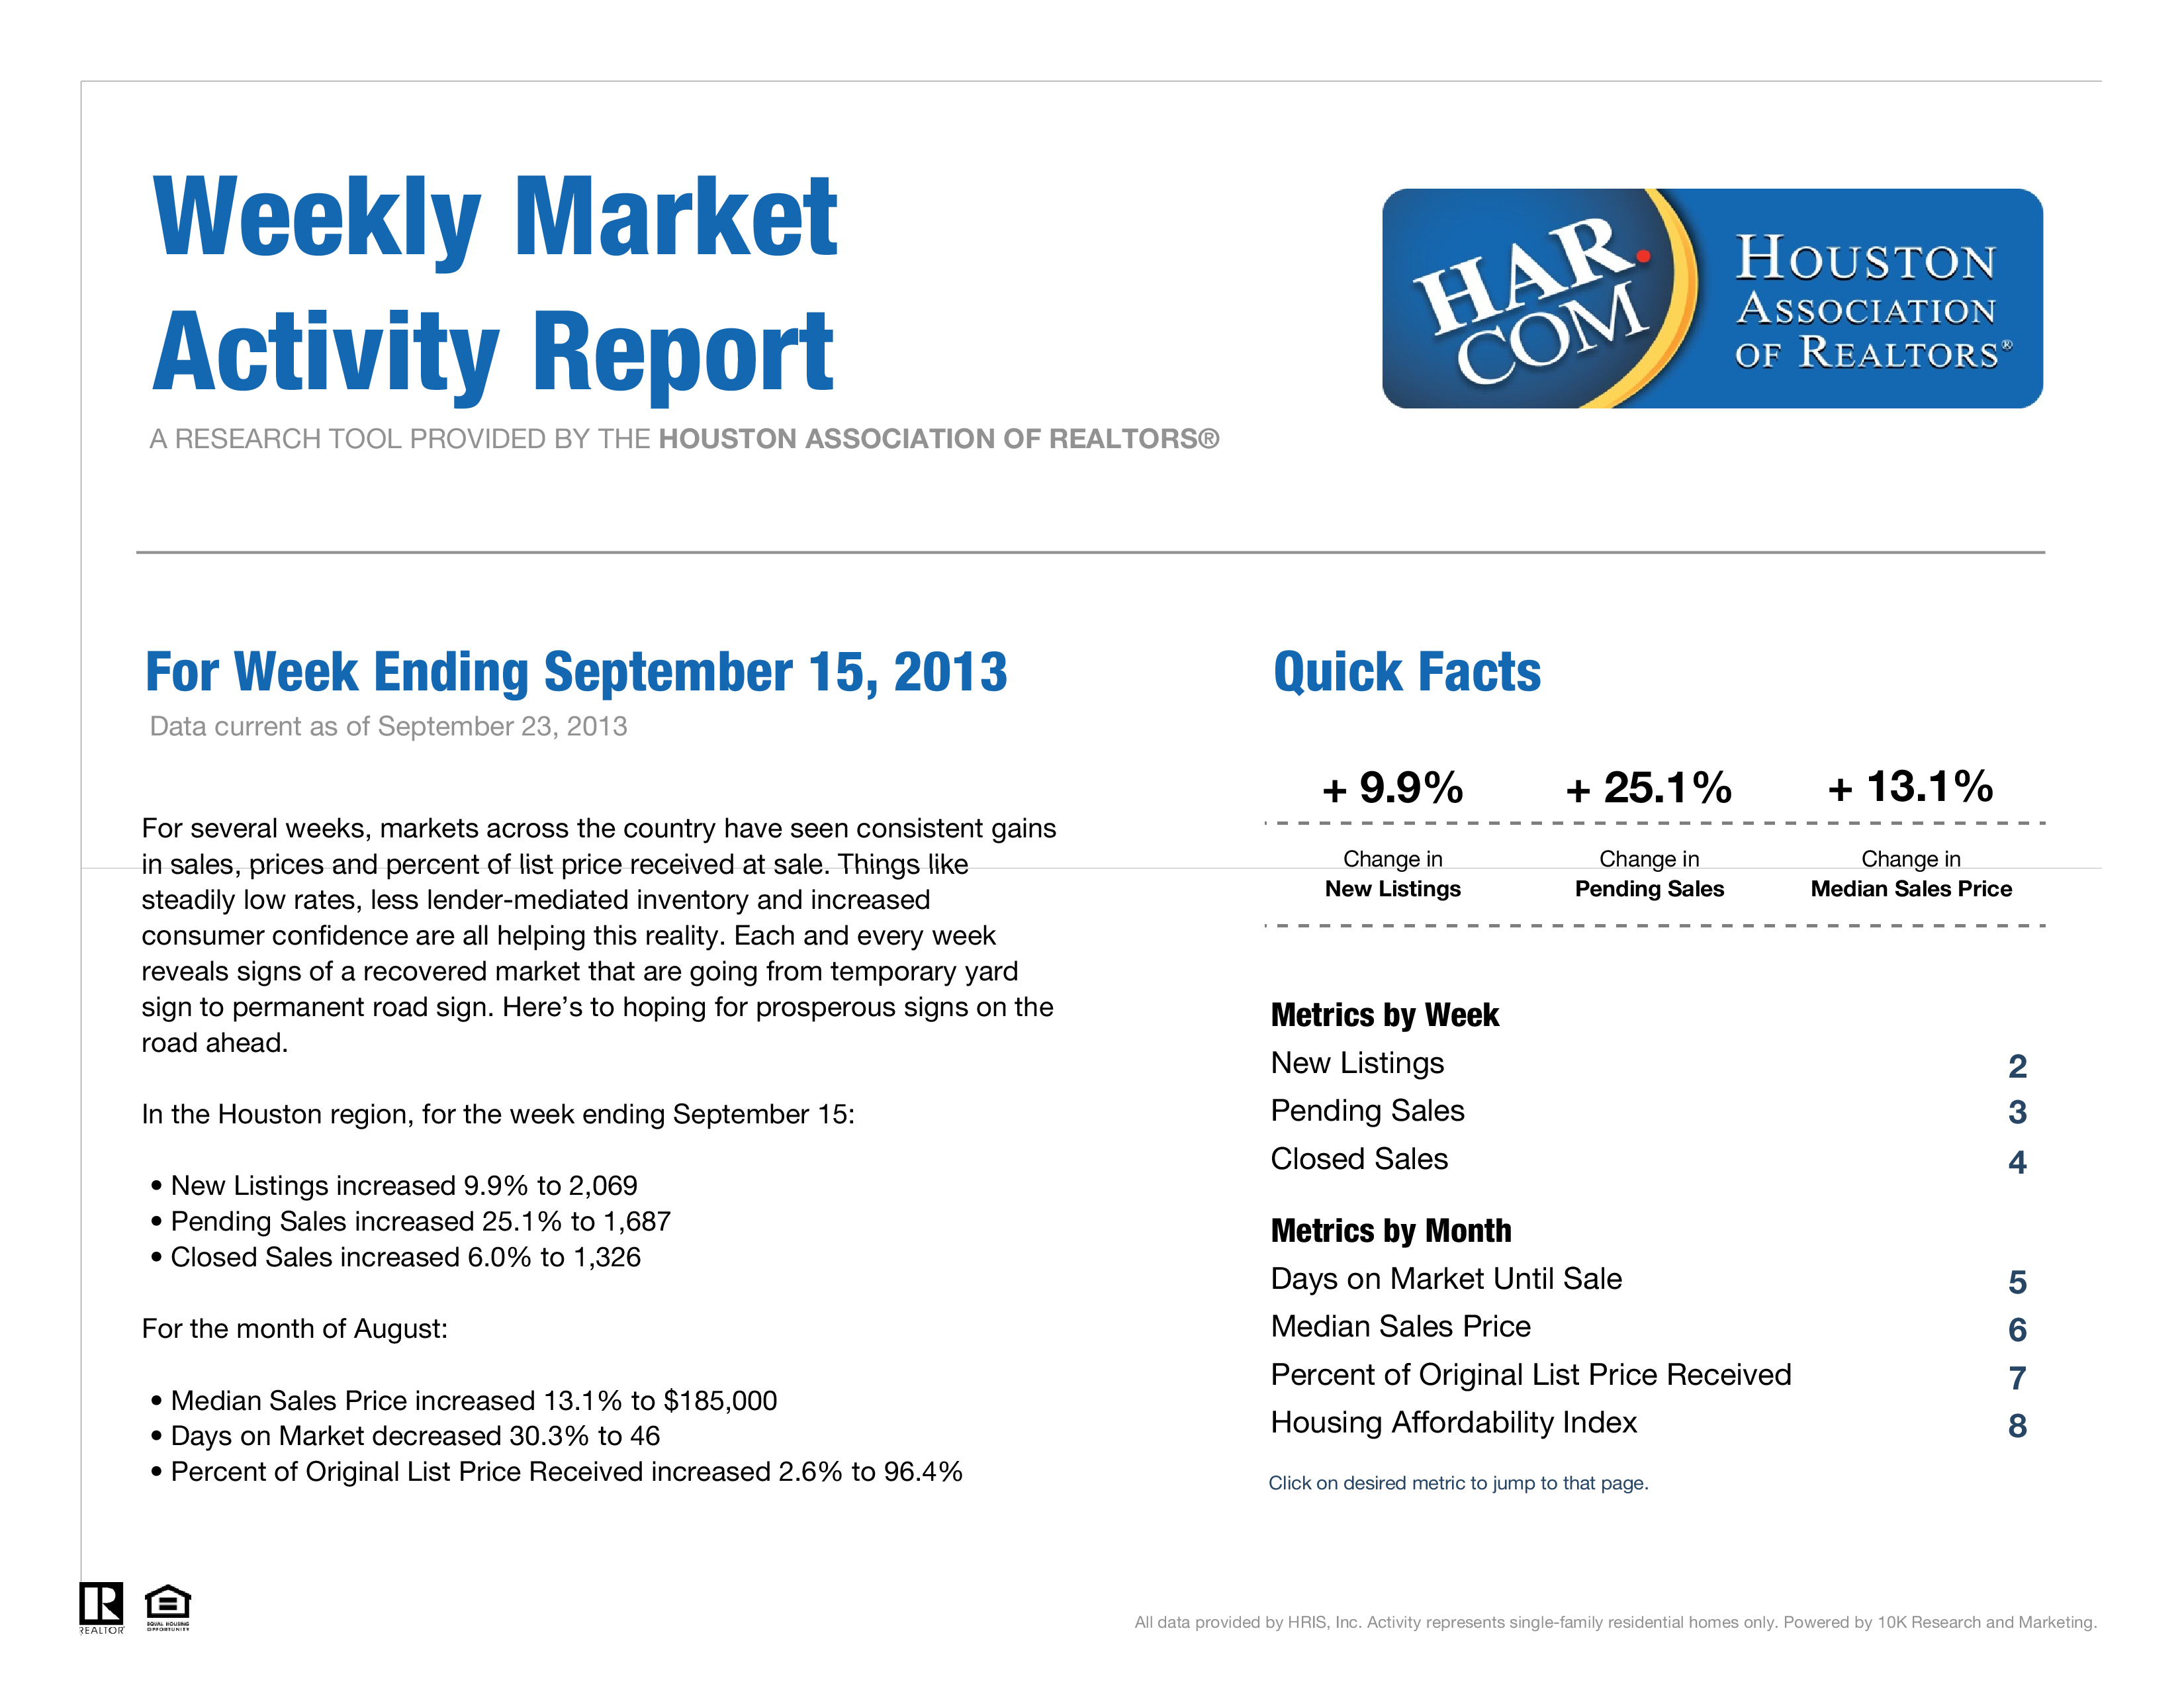 Weekly Market Activity Report Templates at